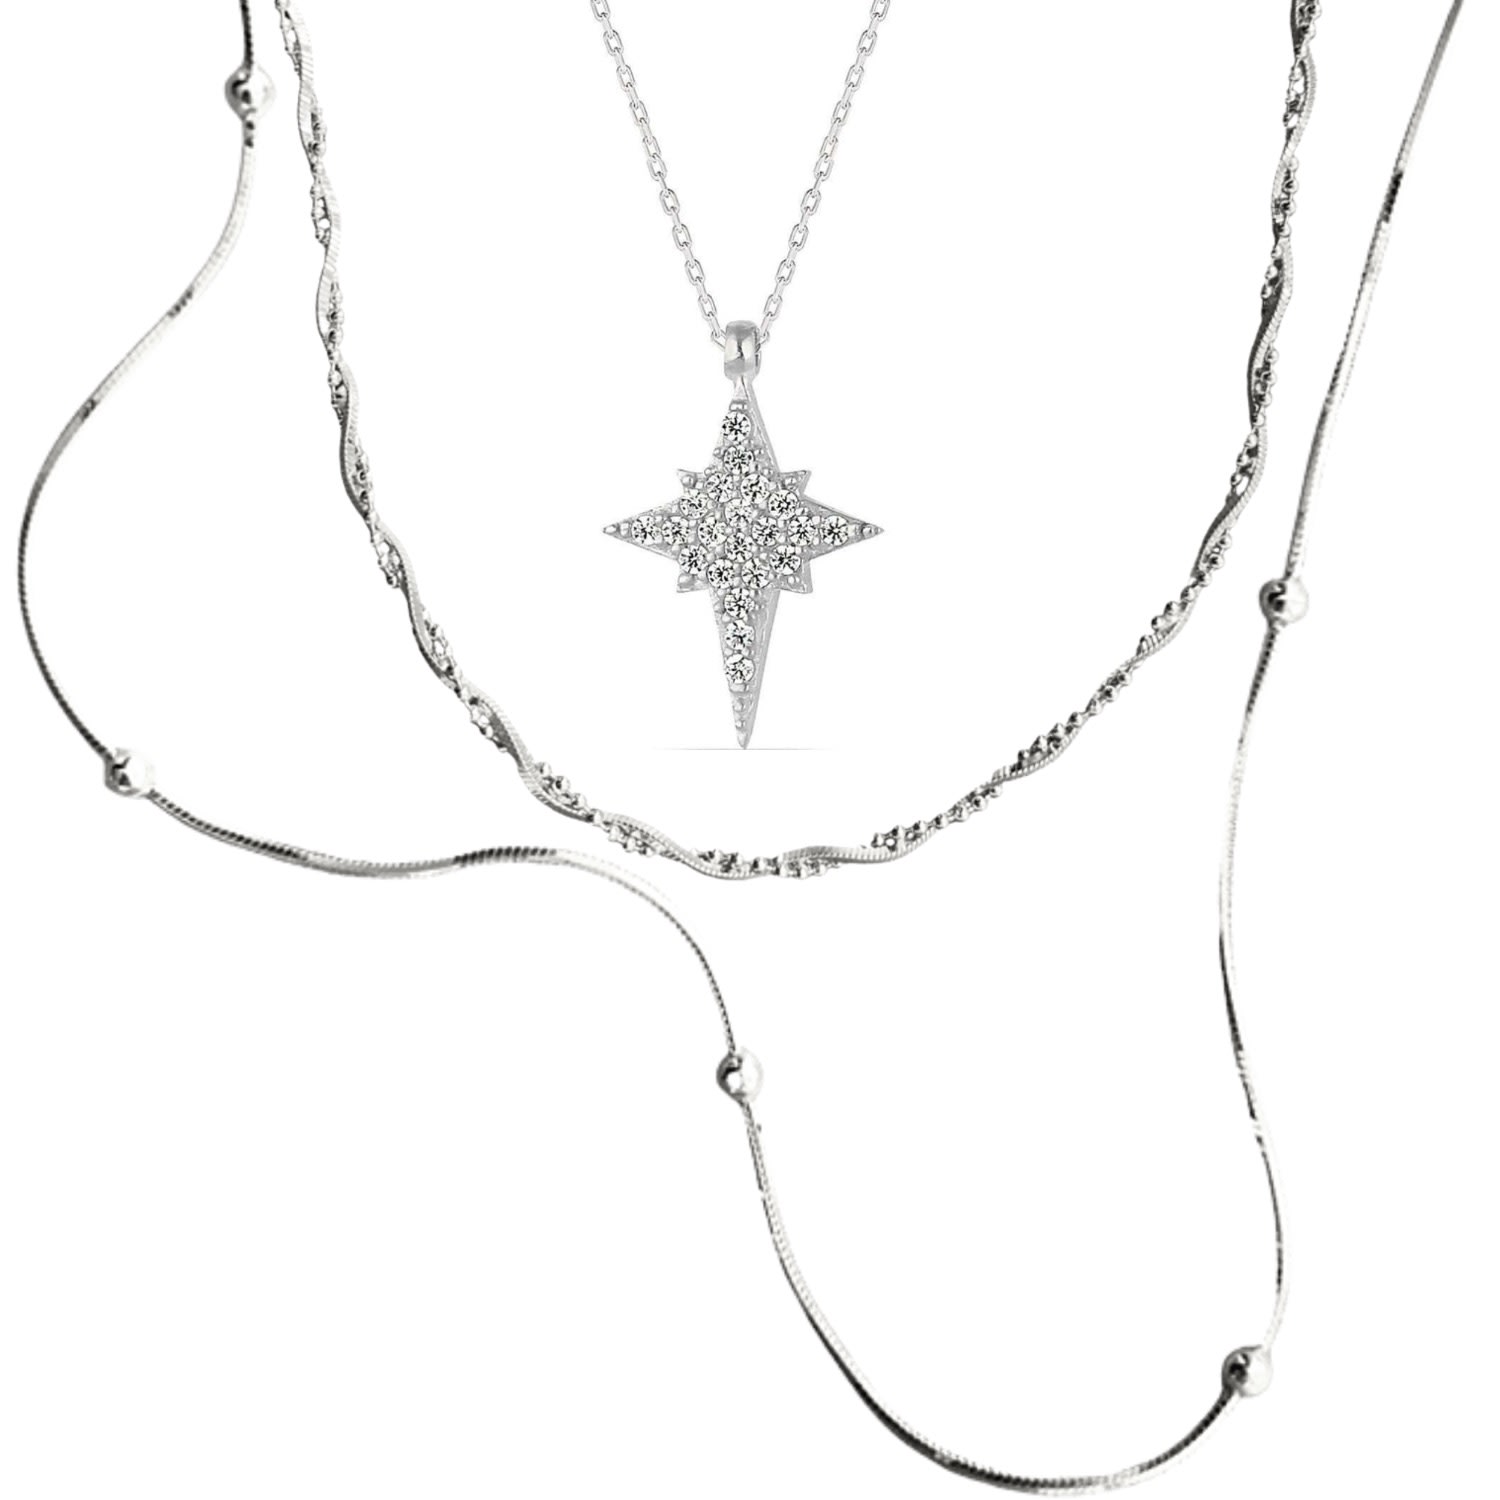 Spero London Women's Necklace Layering Set Beaded Twisted And Northern Starburst Star - Silver In Metallic